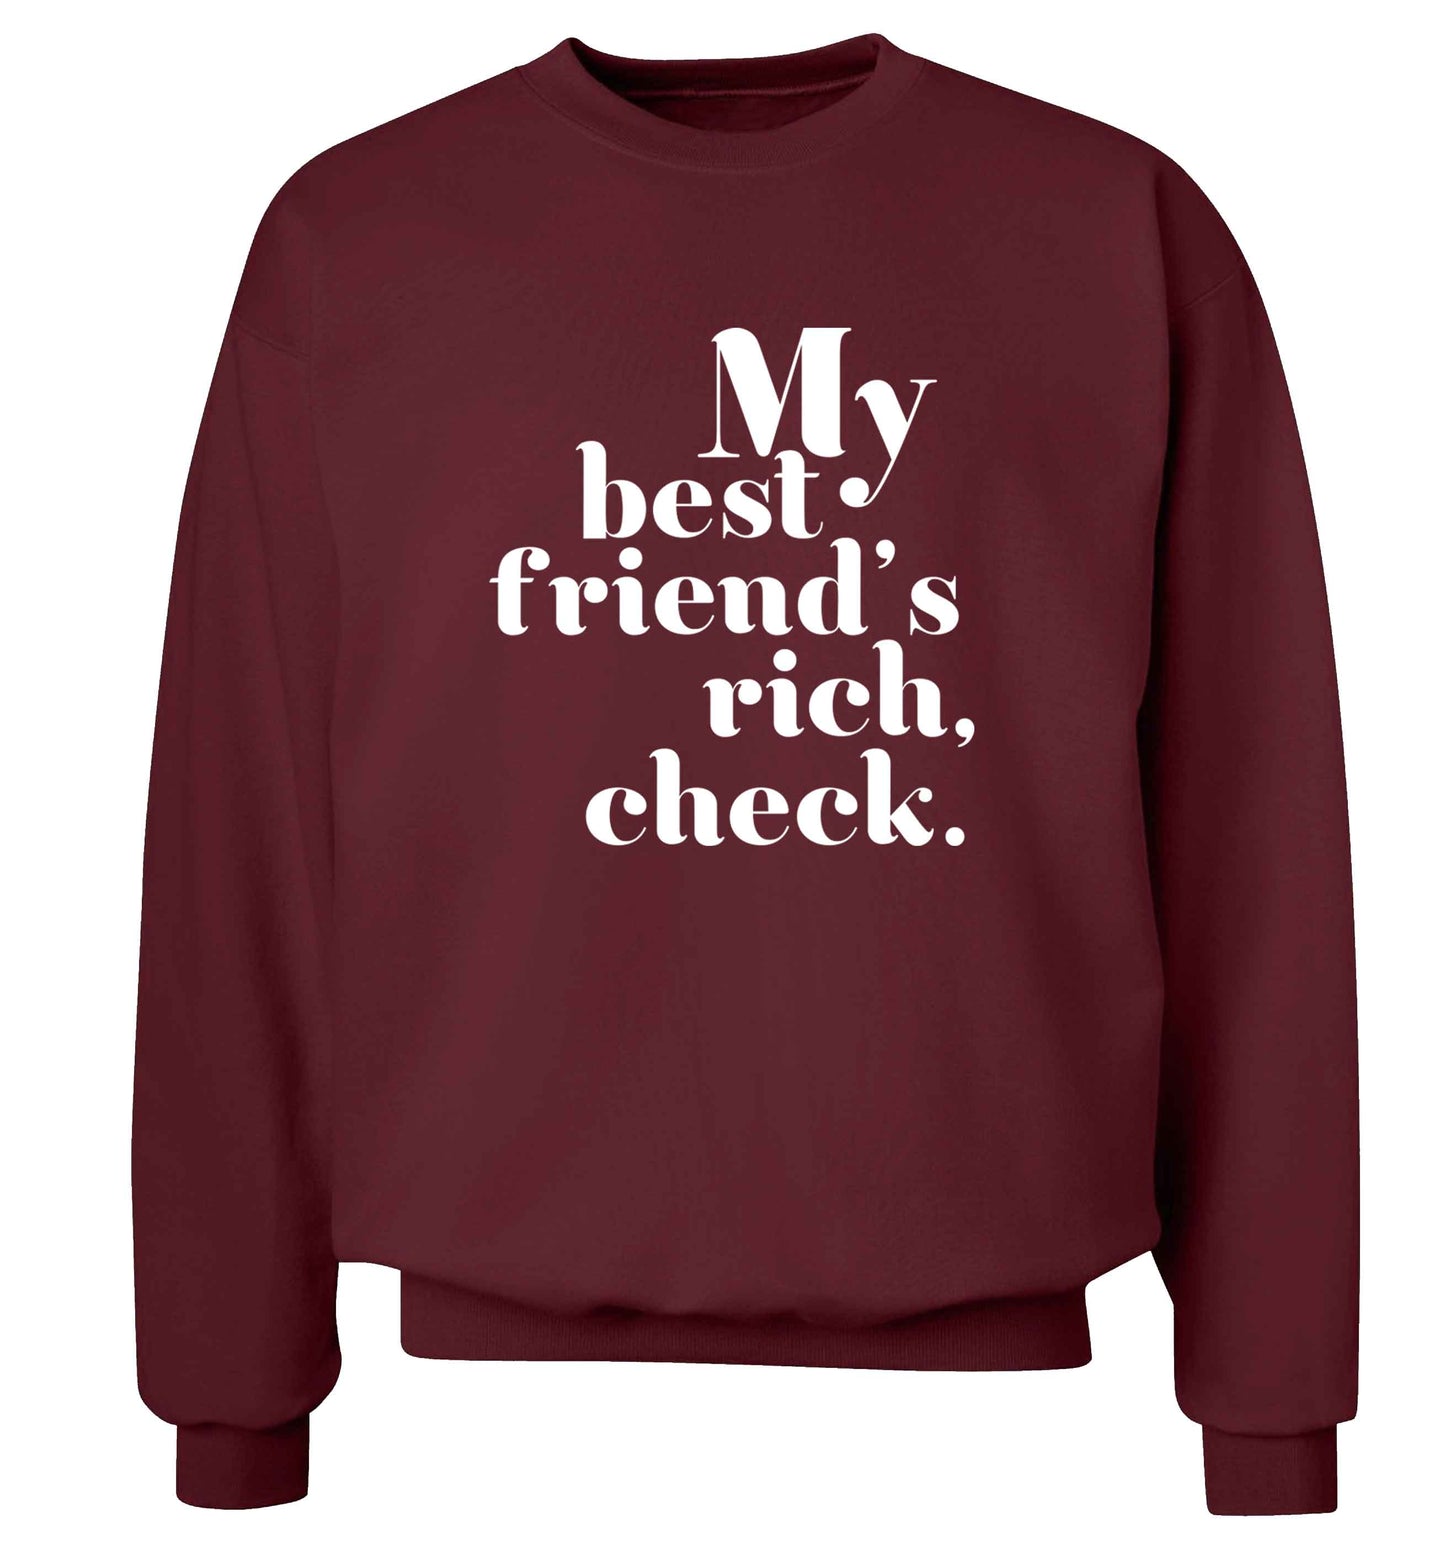 Got a rich best friend? Why not ask them to get you this, just let us  know and we'll tripple the price ;)  adult's unisex maroon sweater 2XL